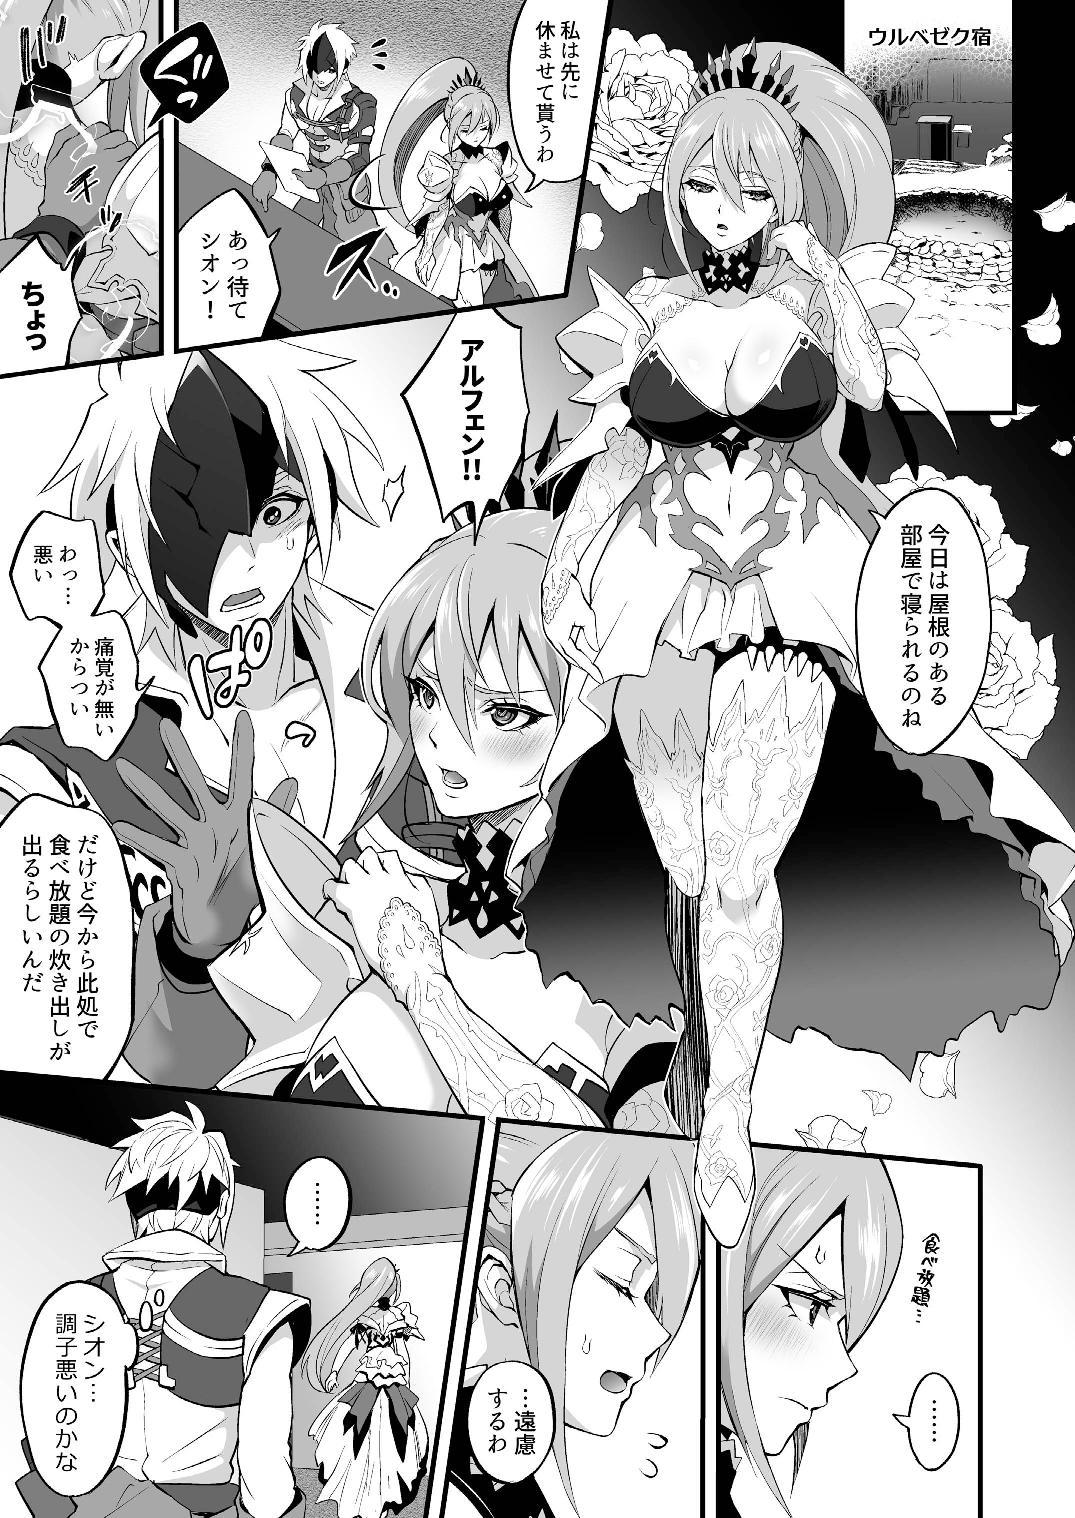 Spanish 私に詰め寄ると〇〇〇がイくわよ…! - Tales of arise Girls Getting Fucked - Page 3